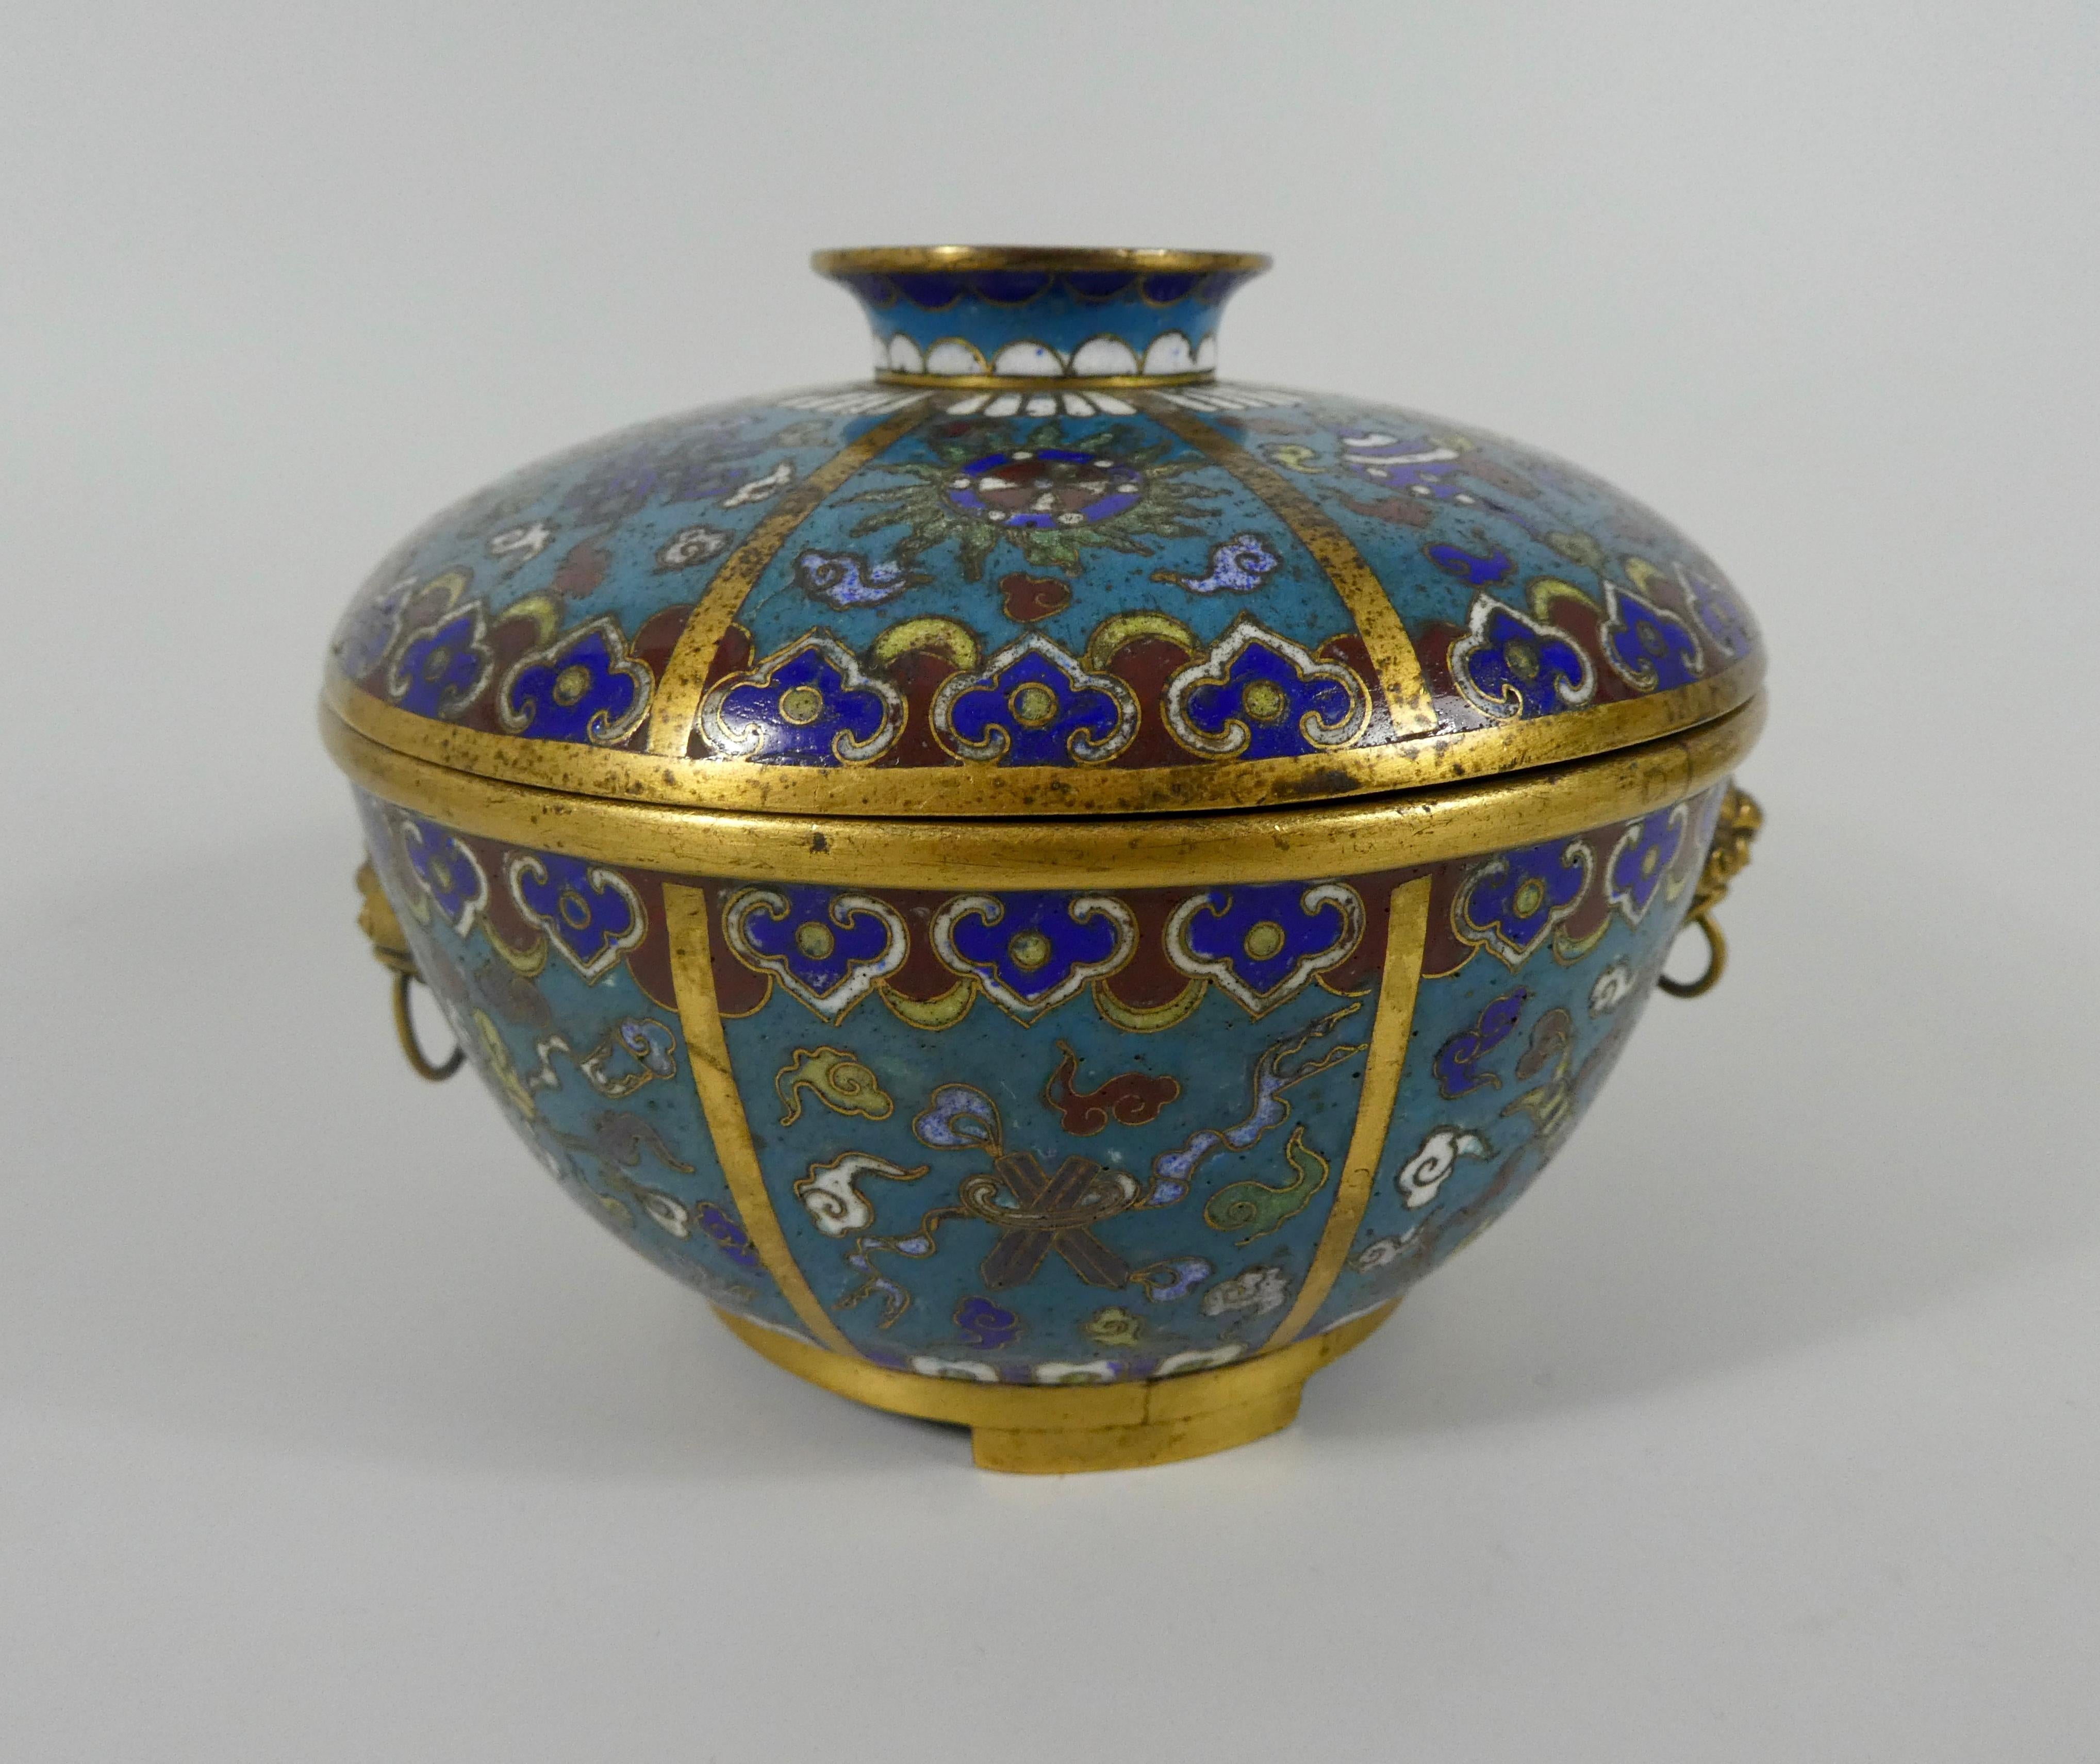 Cloissoné Pair of Chinese Cloisonne Bowls and Covers, early 19th Century, Qing Dynasty